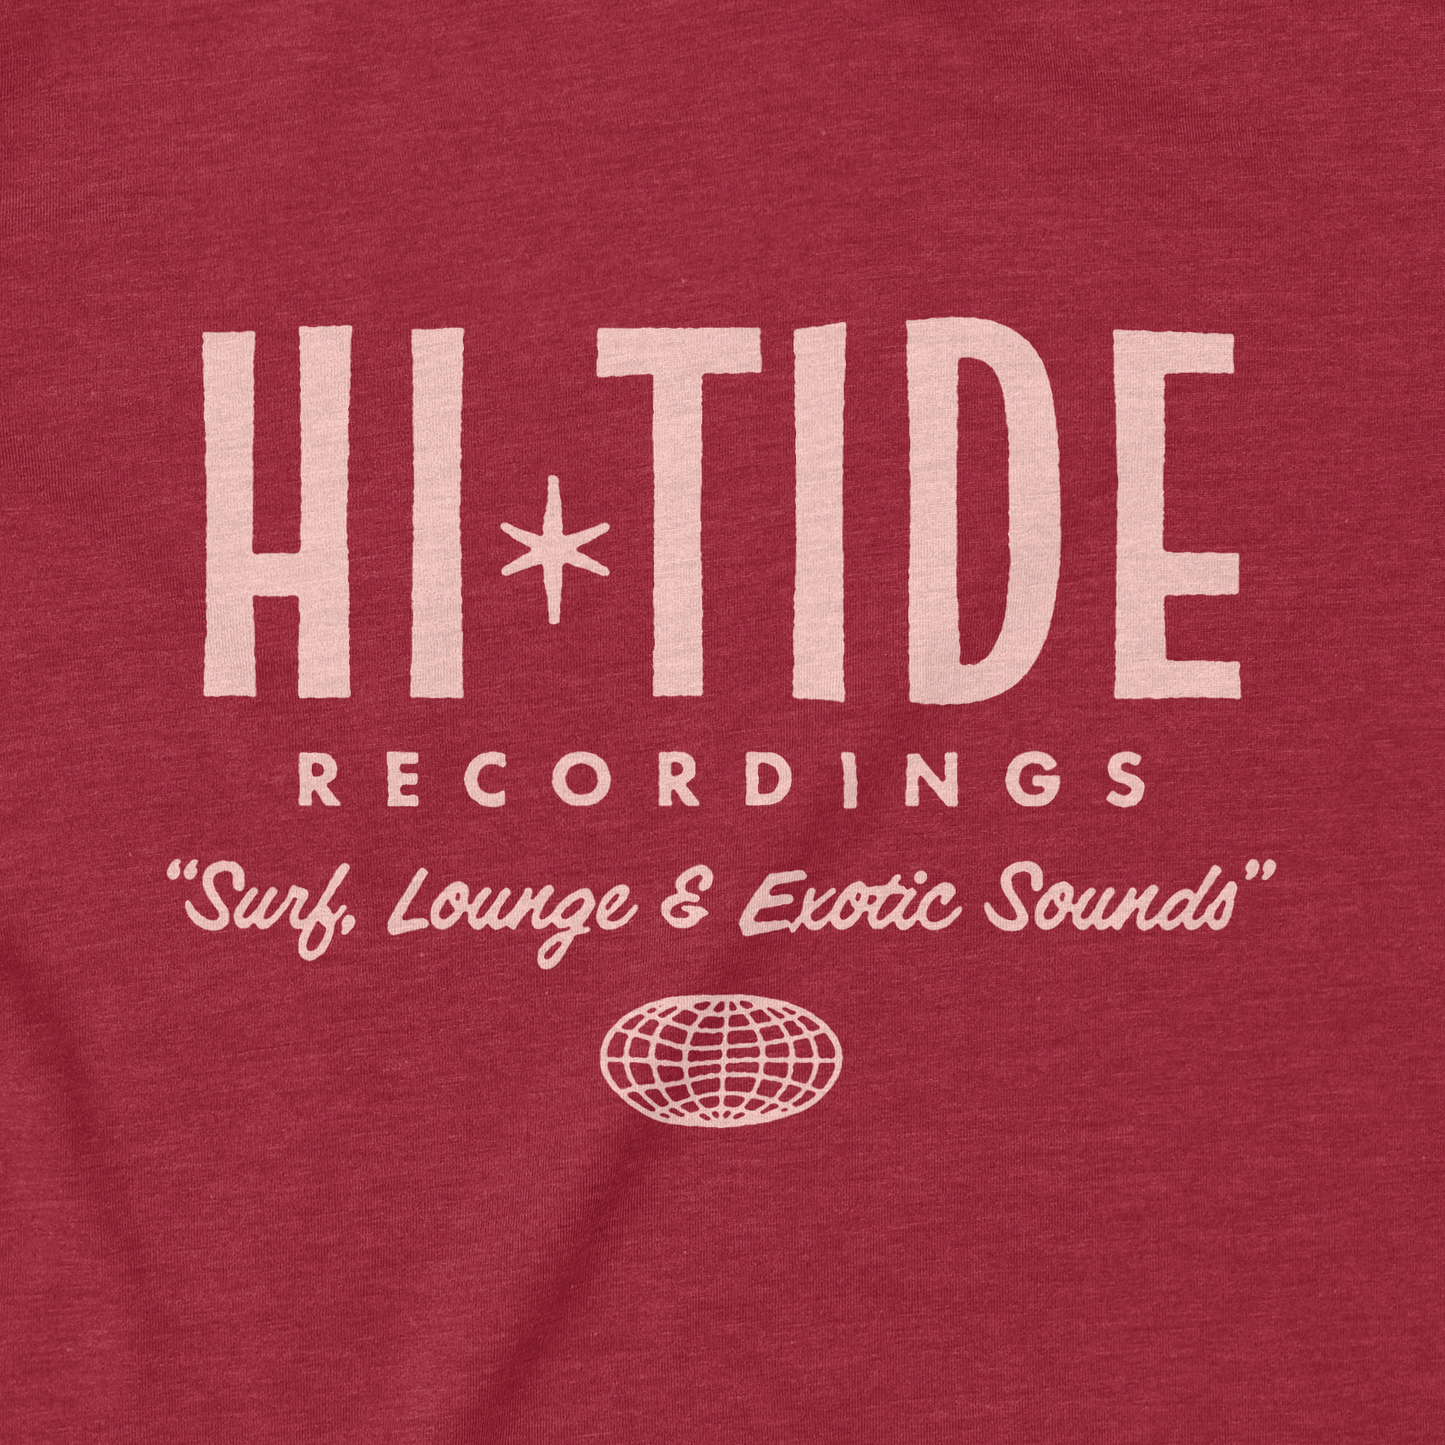 Hi-Tide Recordings "Surf, Lounge & Exotic Sounds" T (Cherry Red)